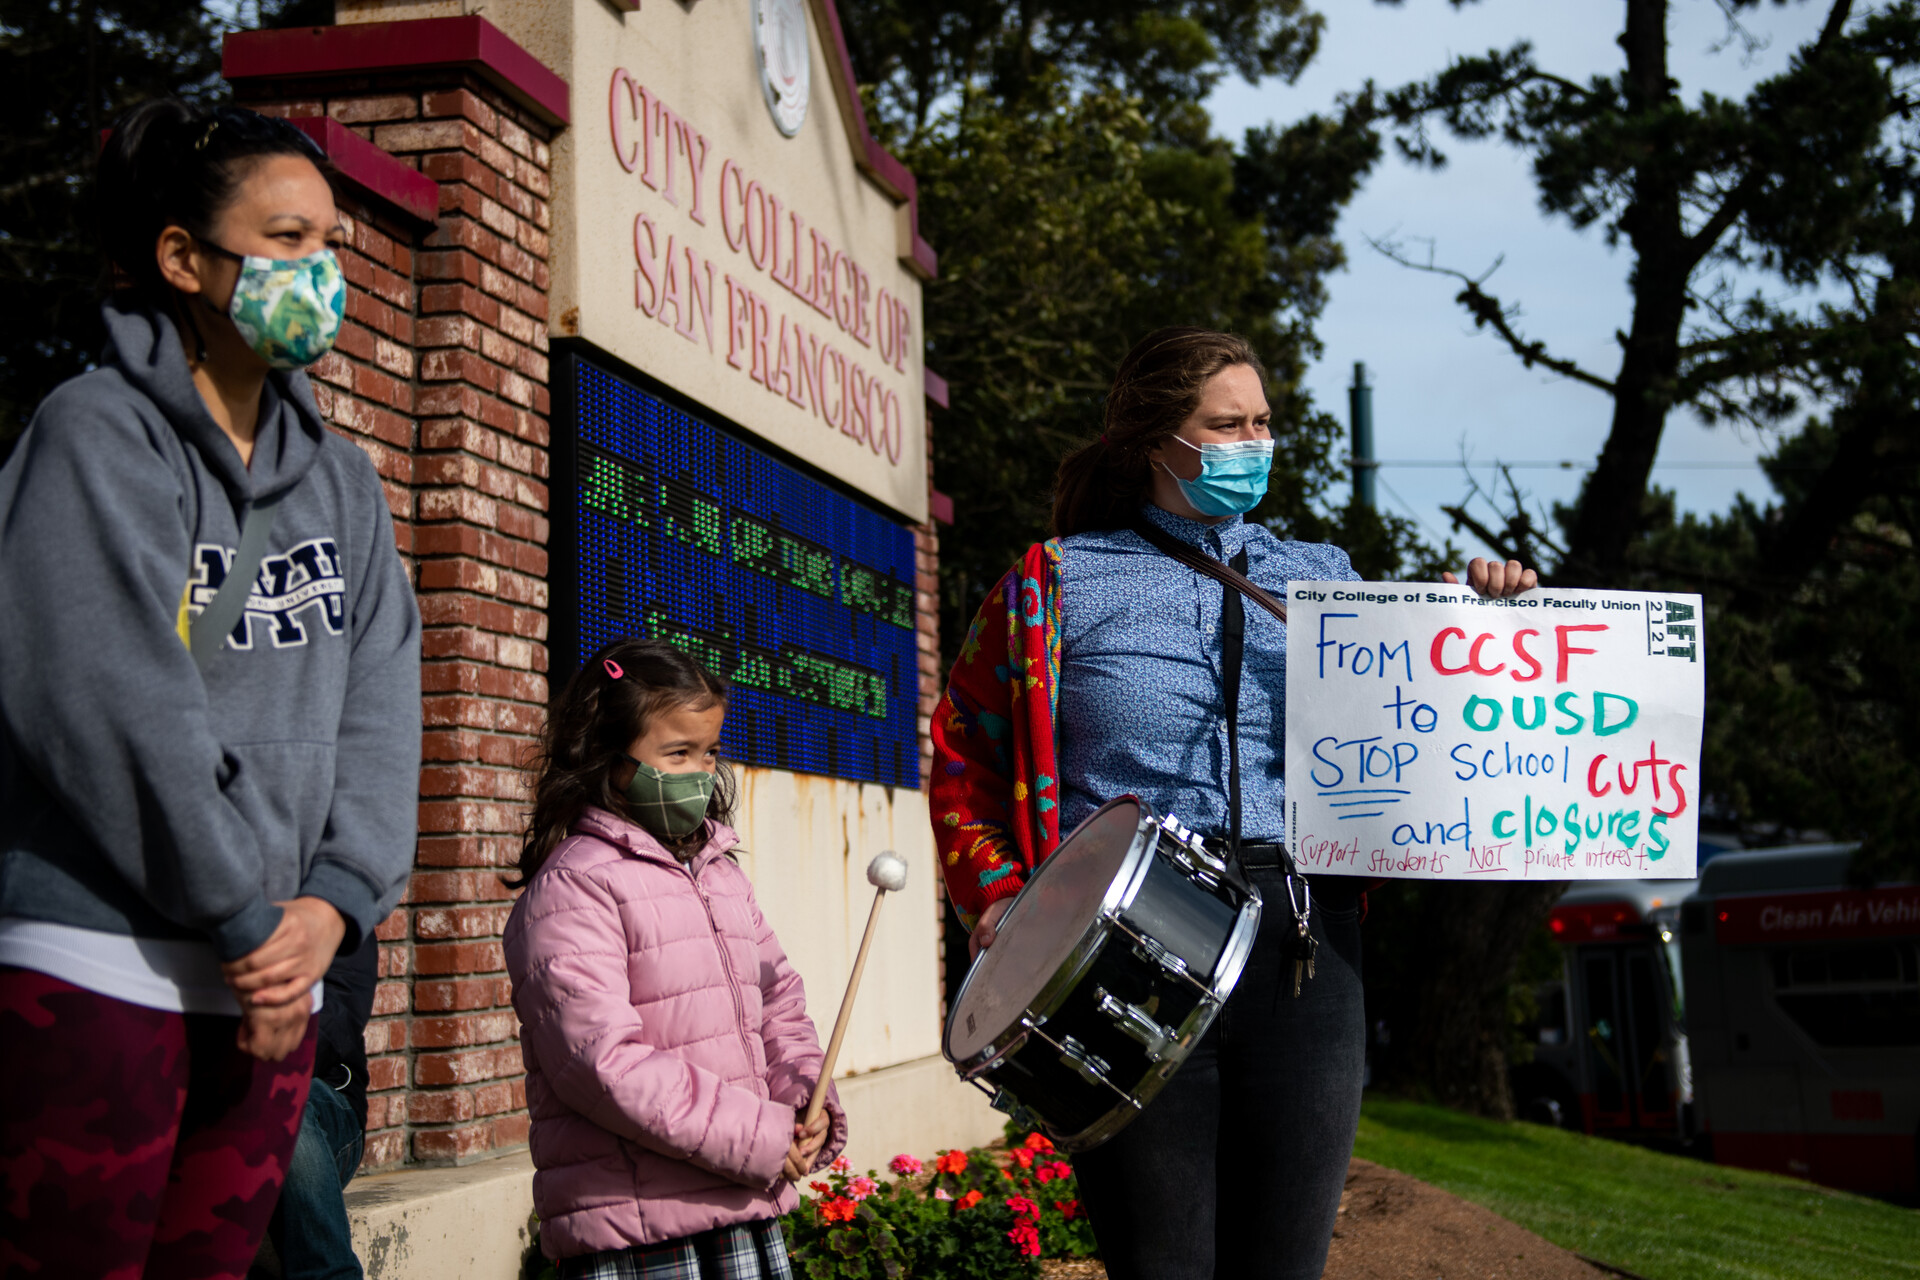 two women and a young girl stand in front of a CCSF sign holding a drum and their own protest sign reading 'from CCSF to OUSD, stop school cuts and closures'